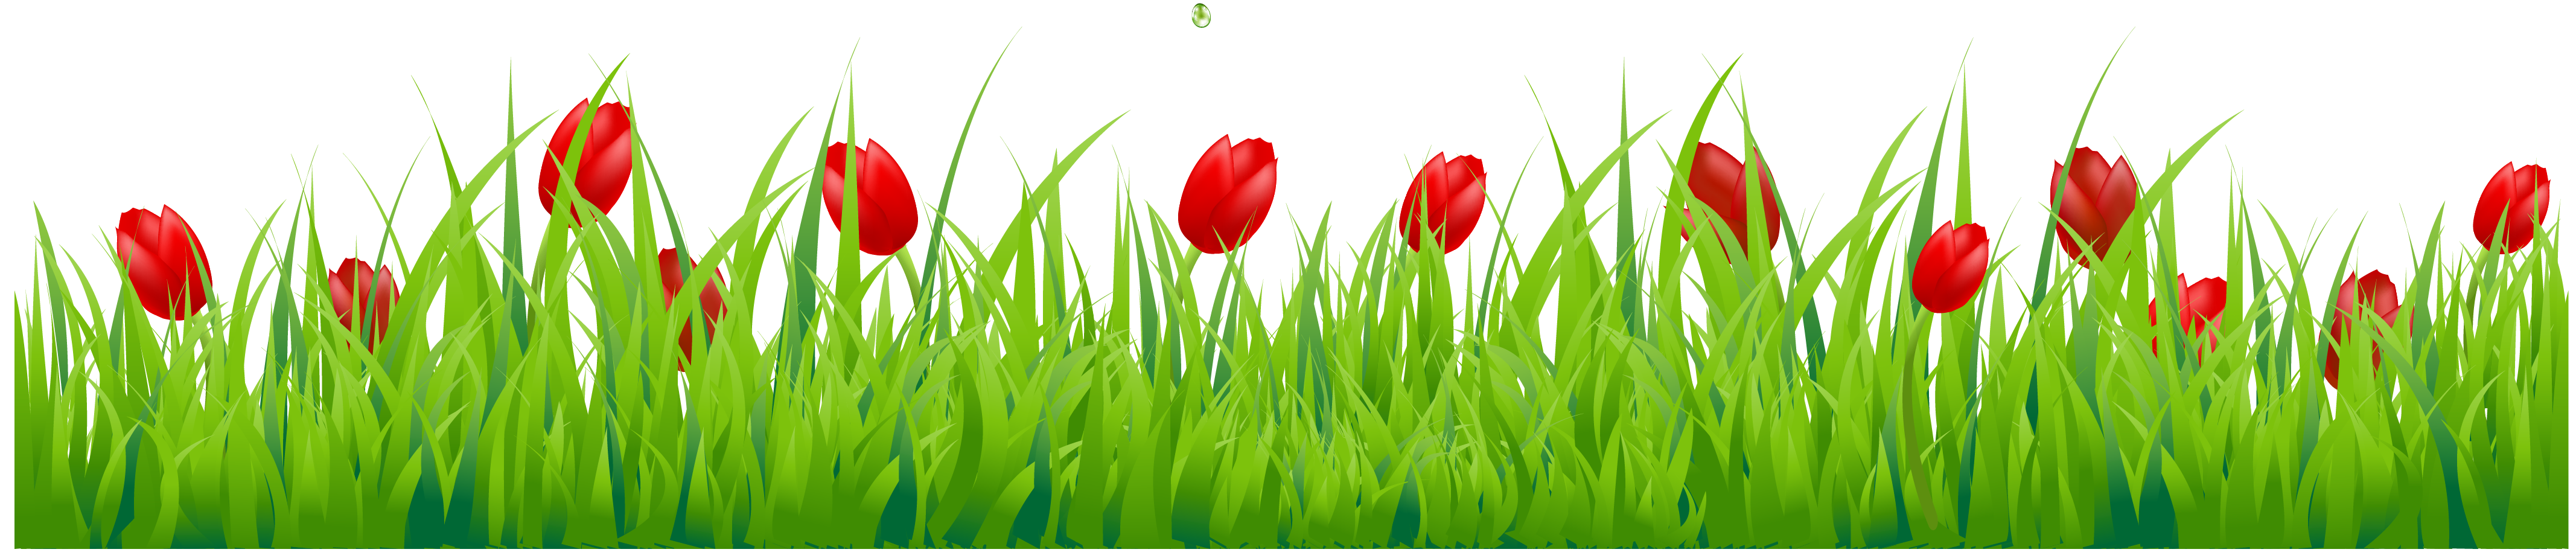 Clipart grass frame. With red tulips vector